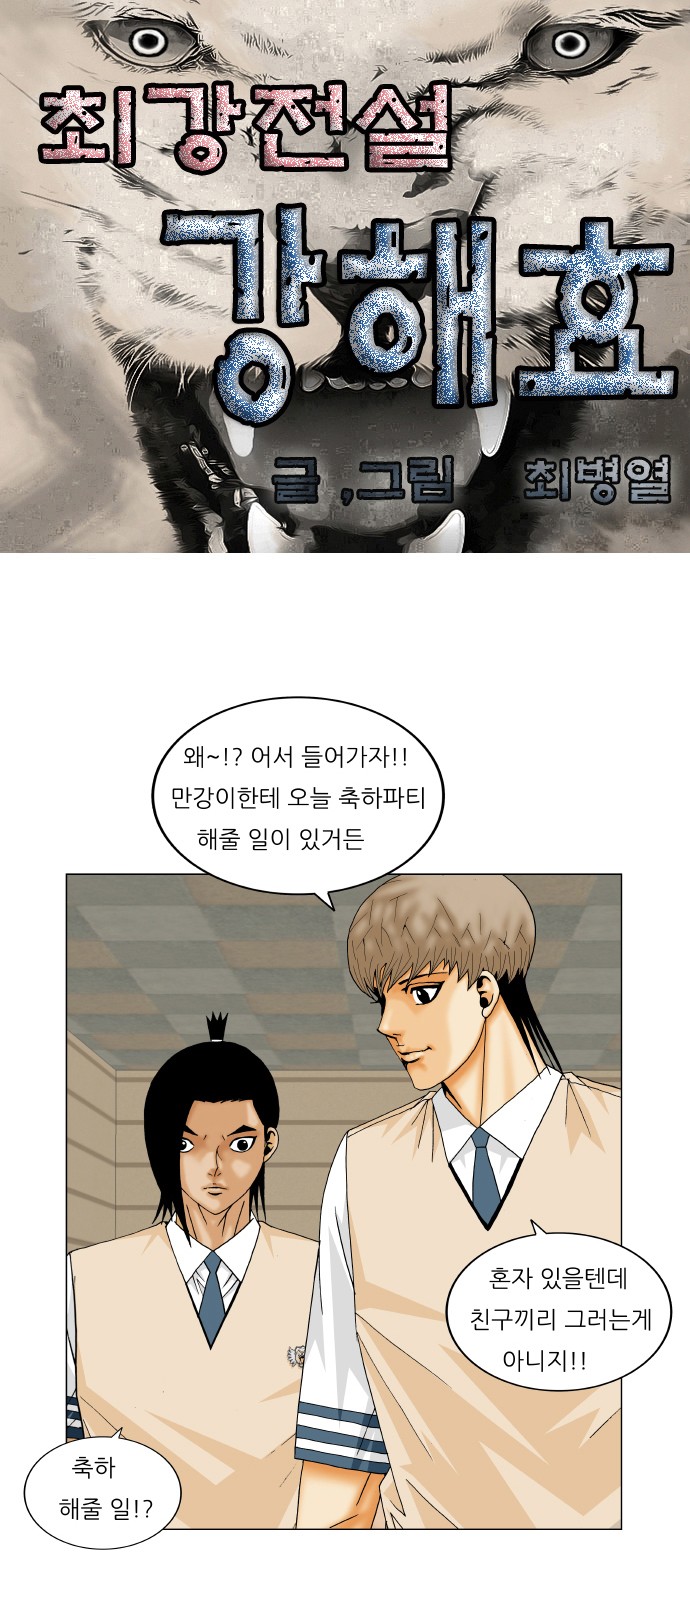 Ultimate Legend - Kang Hae Hyo - Chapter 200 - Page 1